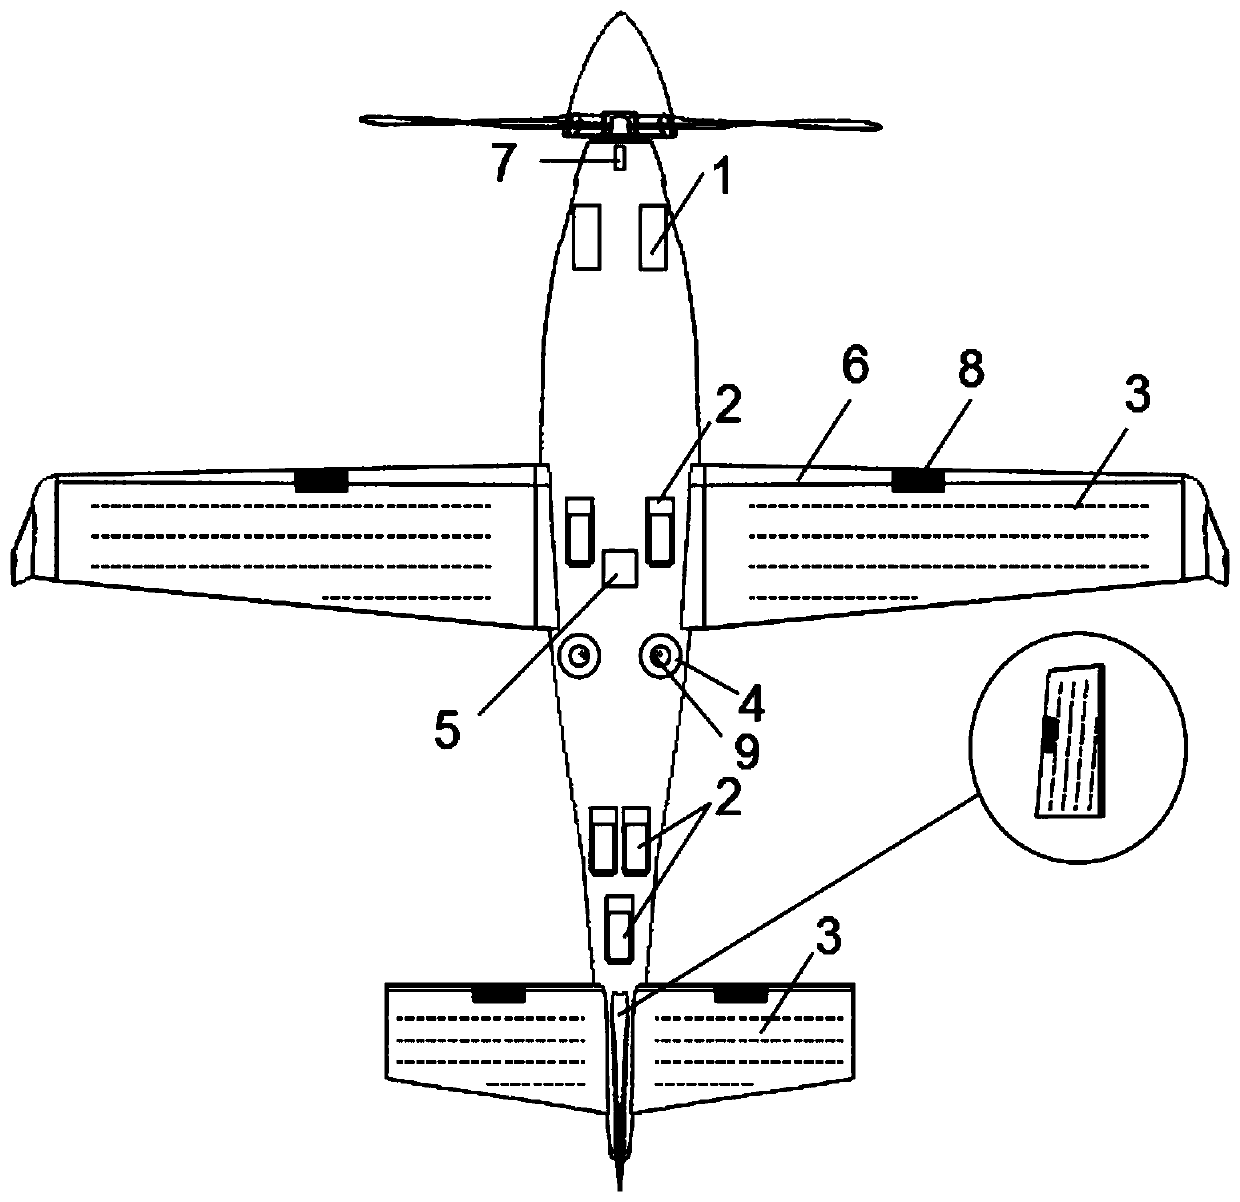 Anti-icing and deicing device and method for wings and emages of turbo-prop aircraft